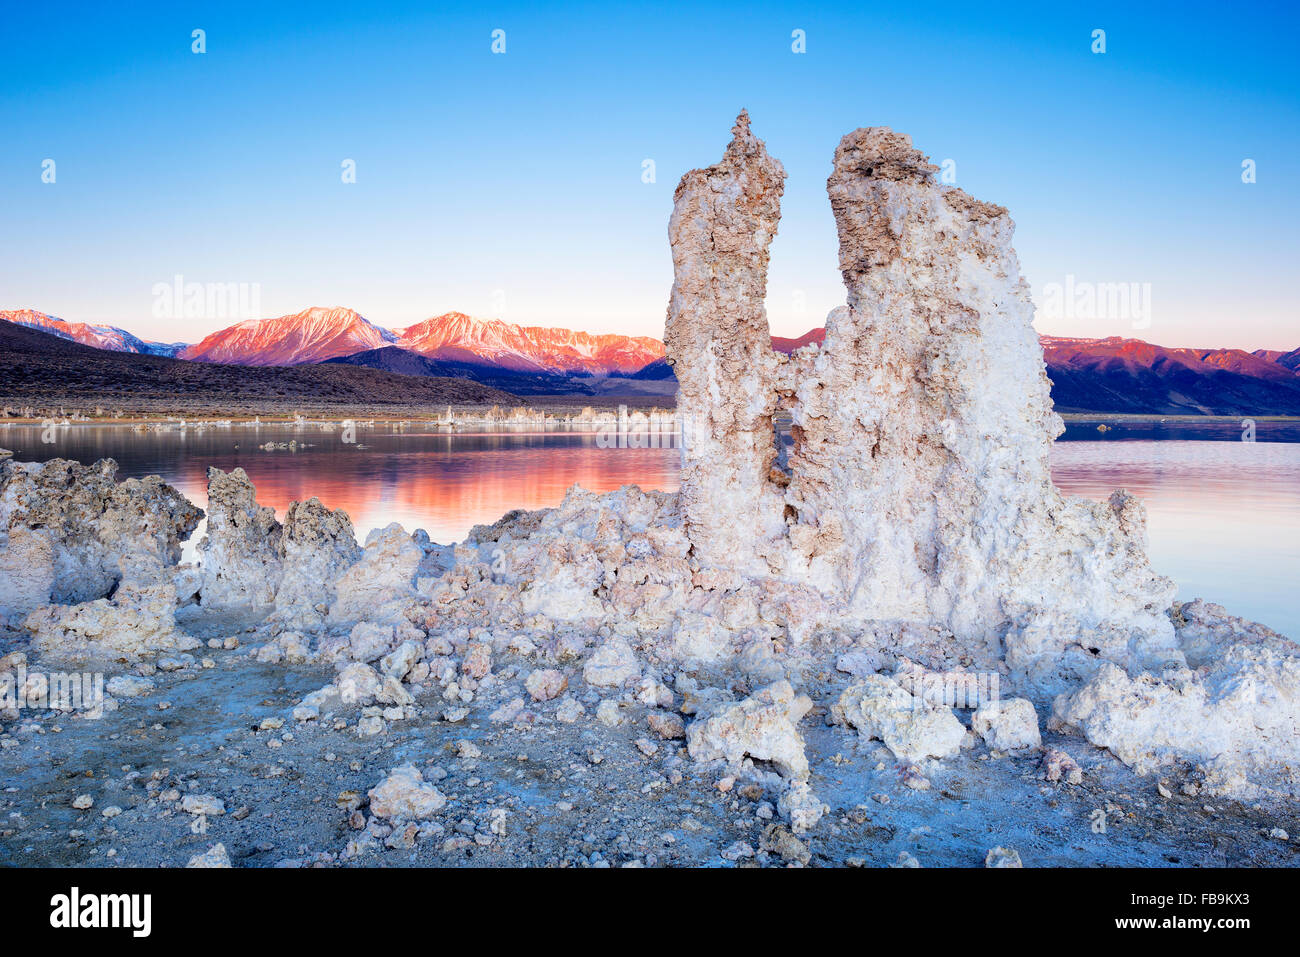 Tufa rock formations at South Tufa, Mono Lake, California, with the Eastern Sierras in the background Stock Photo